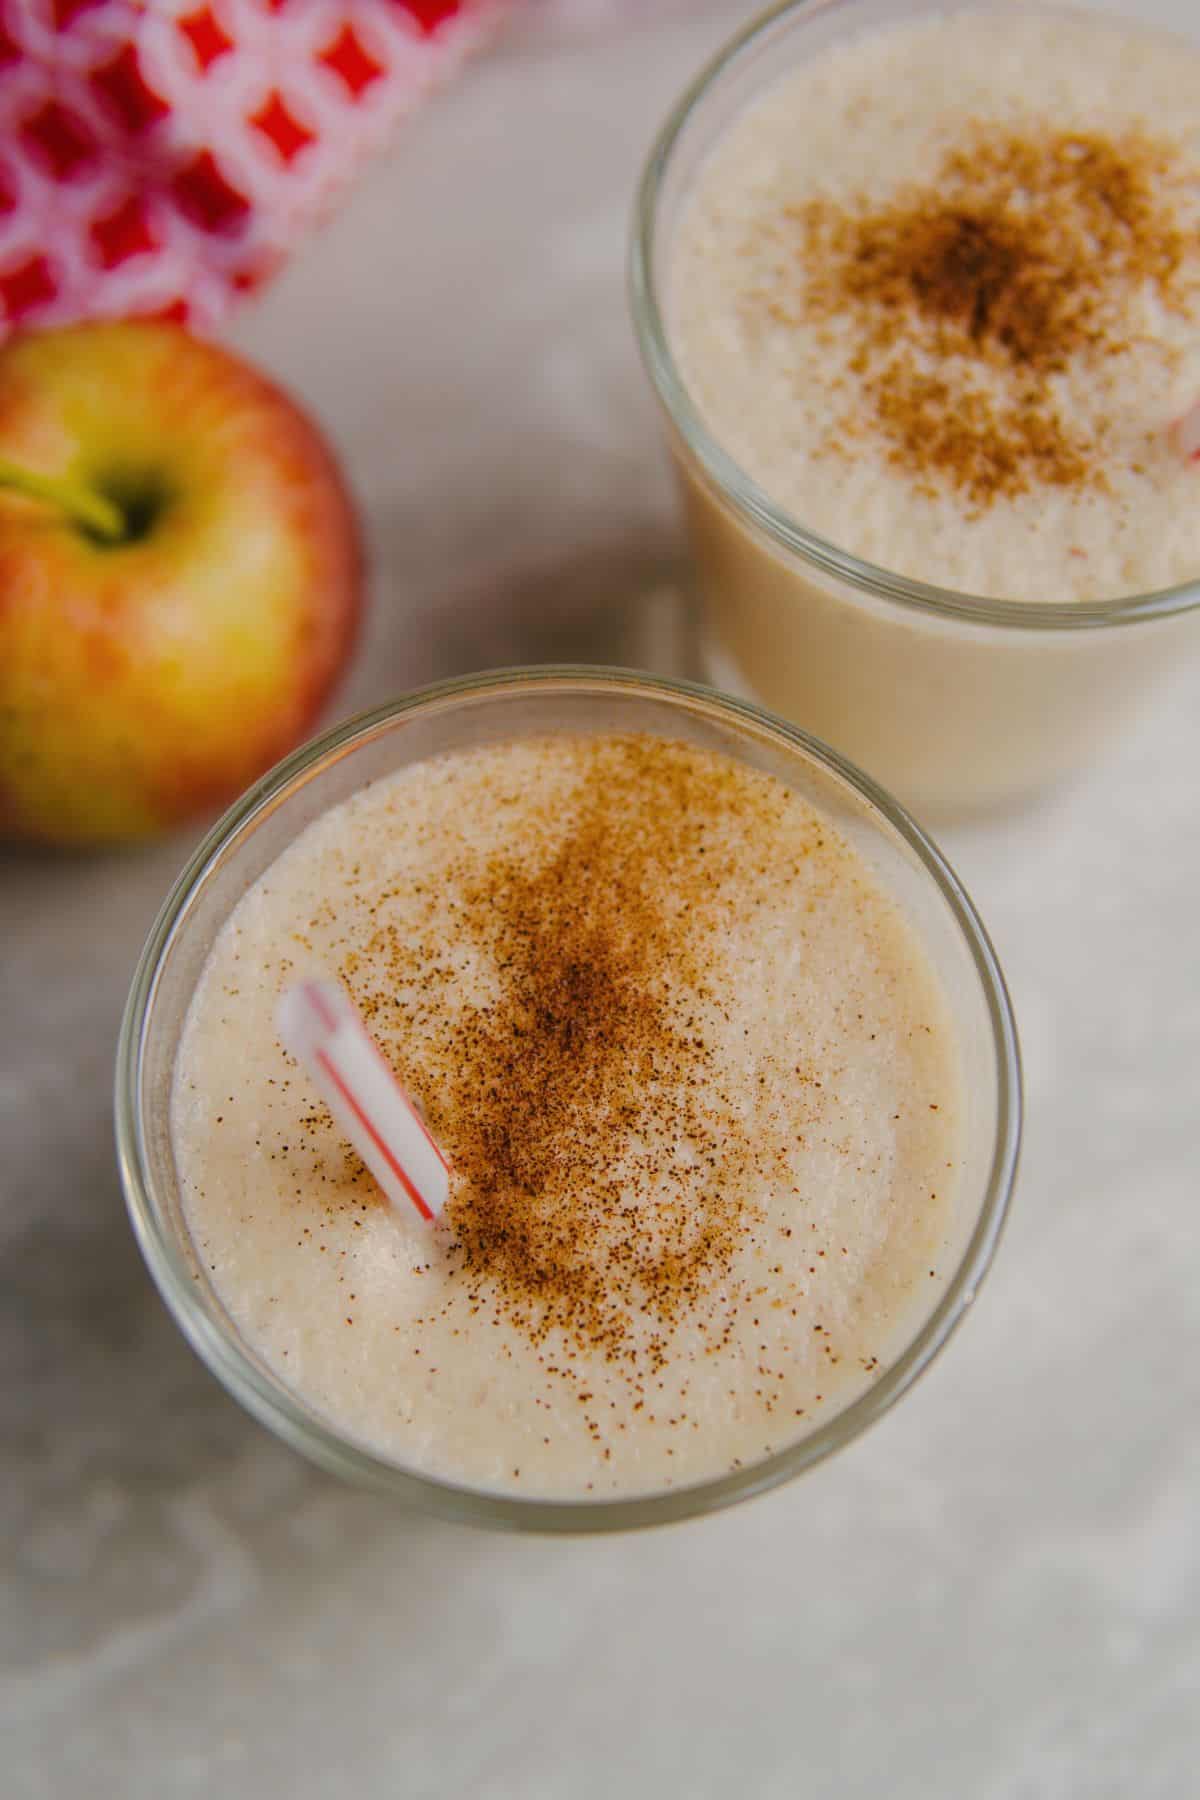 Apple smoothie with cinnamon powder on top.